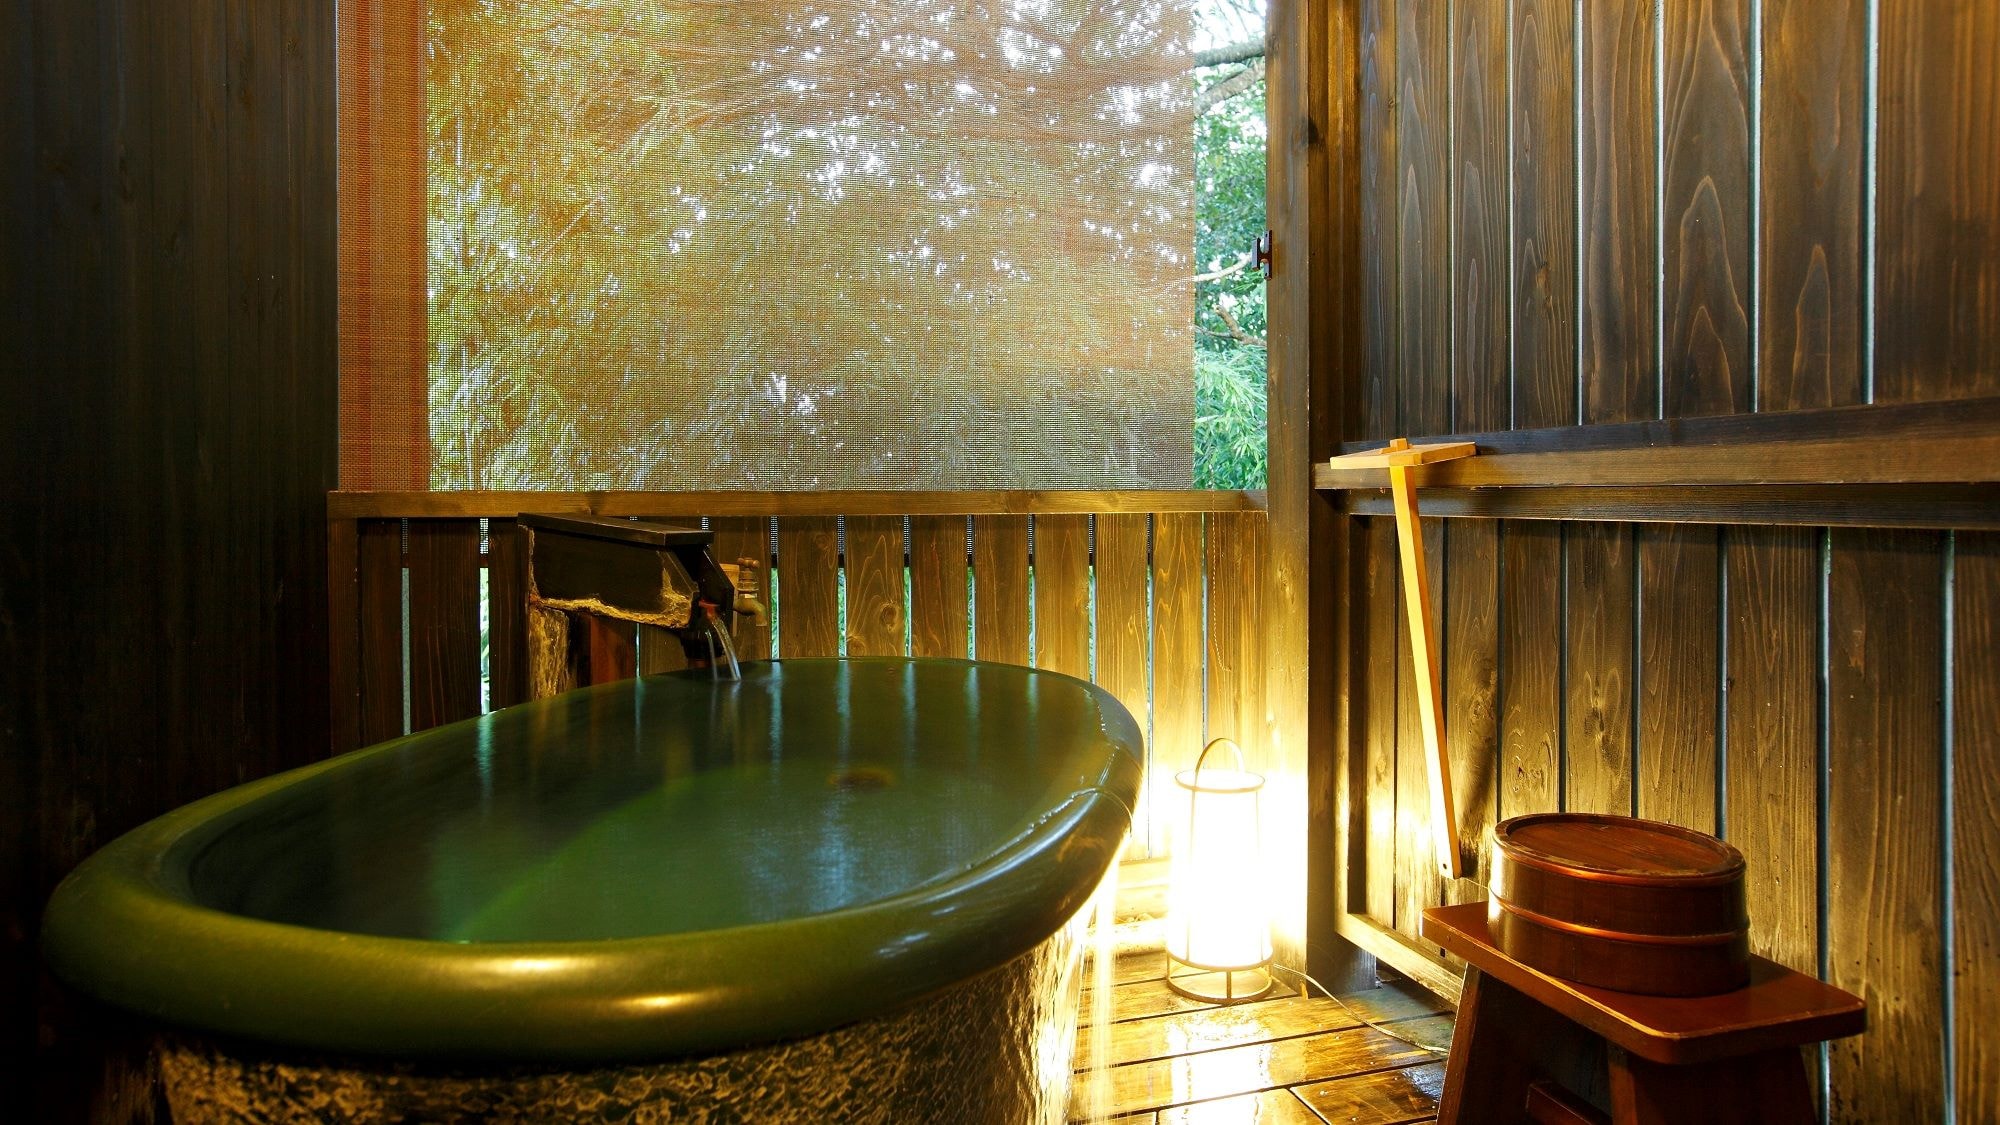 [Annex Takebue] Kiranosato's most popular guest room with an open-air hot spring bath